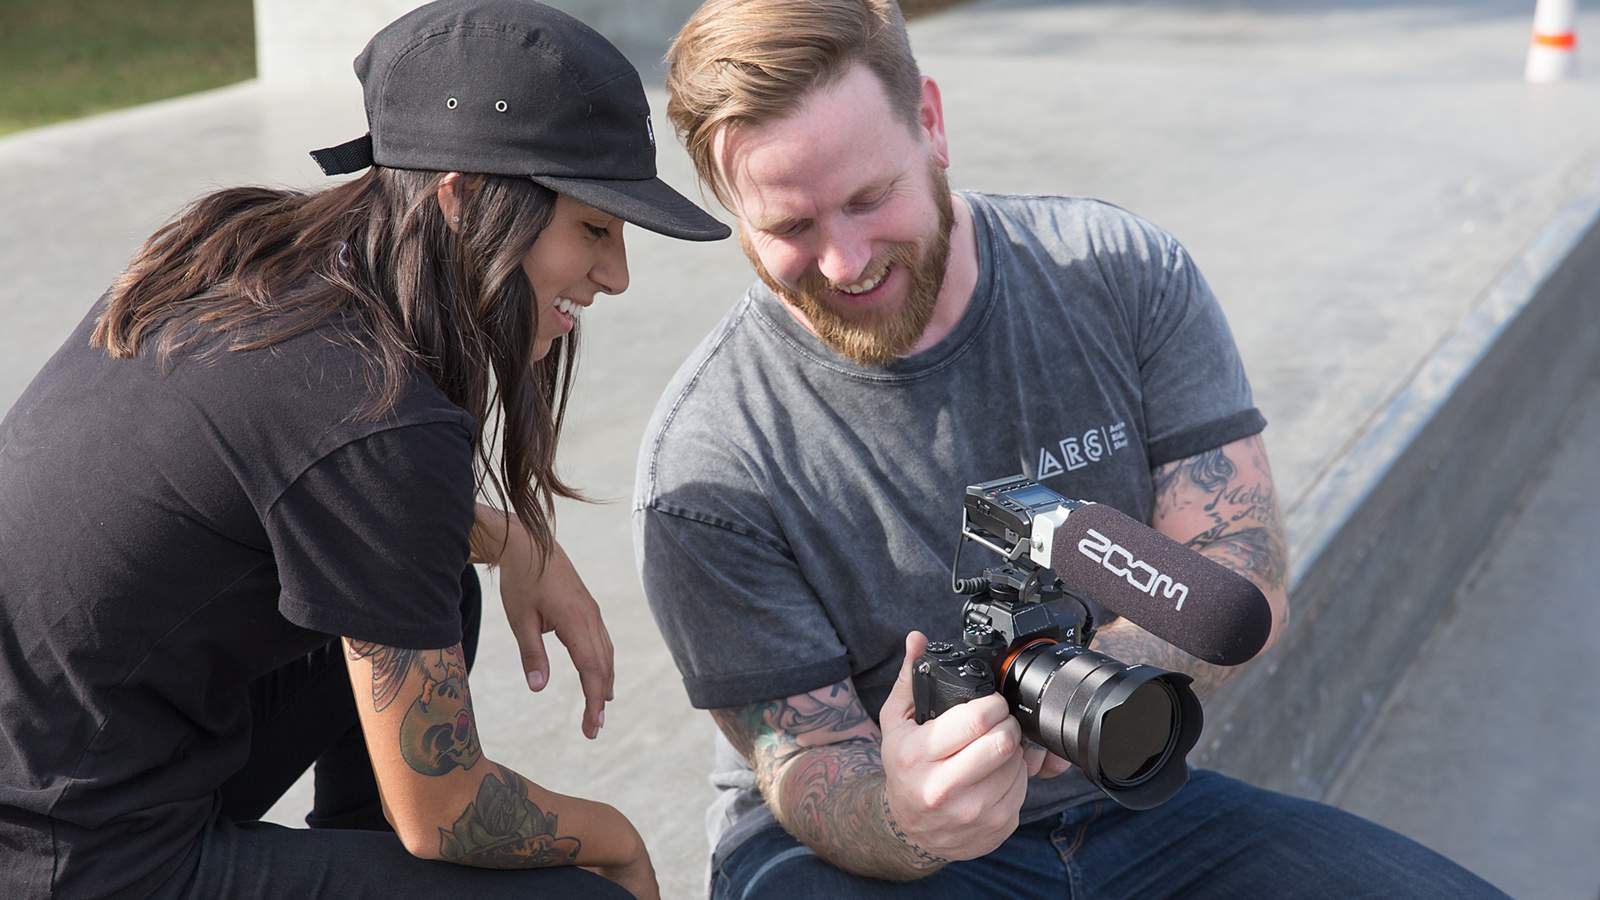 Videographer and skateboarder reviewing footage on DSLR camera with F1-SP mounted